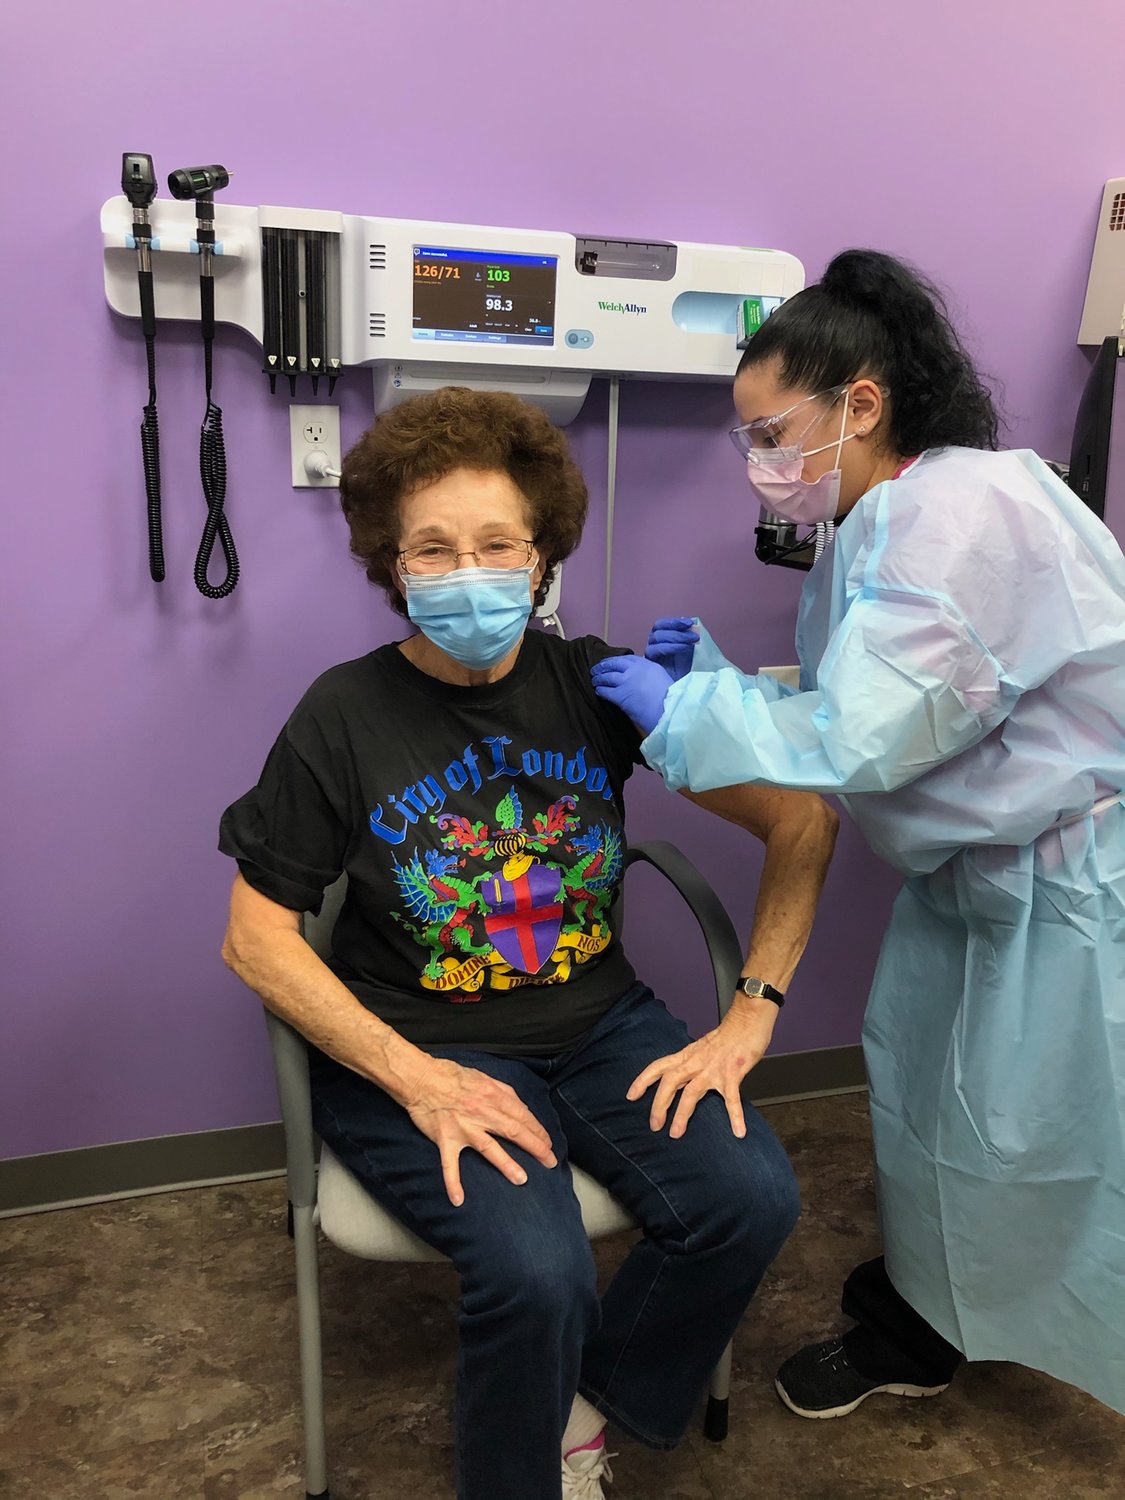 Resident Myrna De Silva traveled to GoHealth Pediatric Urgent Care in Hewlett for her first dose of the Covid-19 vaccine. She secured an appointment with the help of volunteers from Congregation Ohav Sholom, who recently started an initiative to get seniors vaccinated.